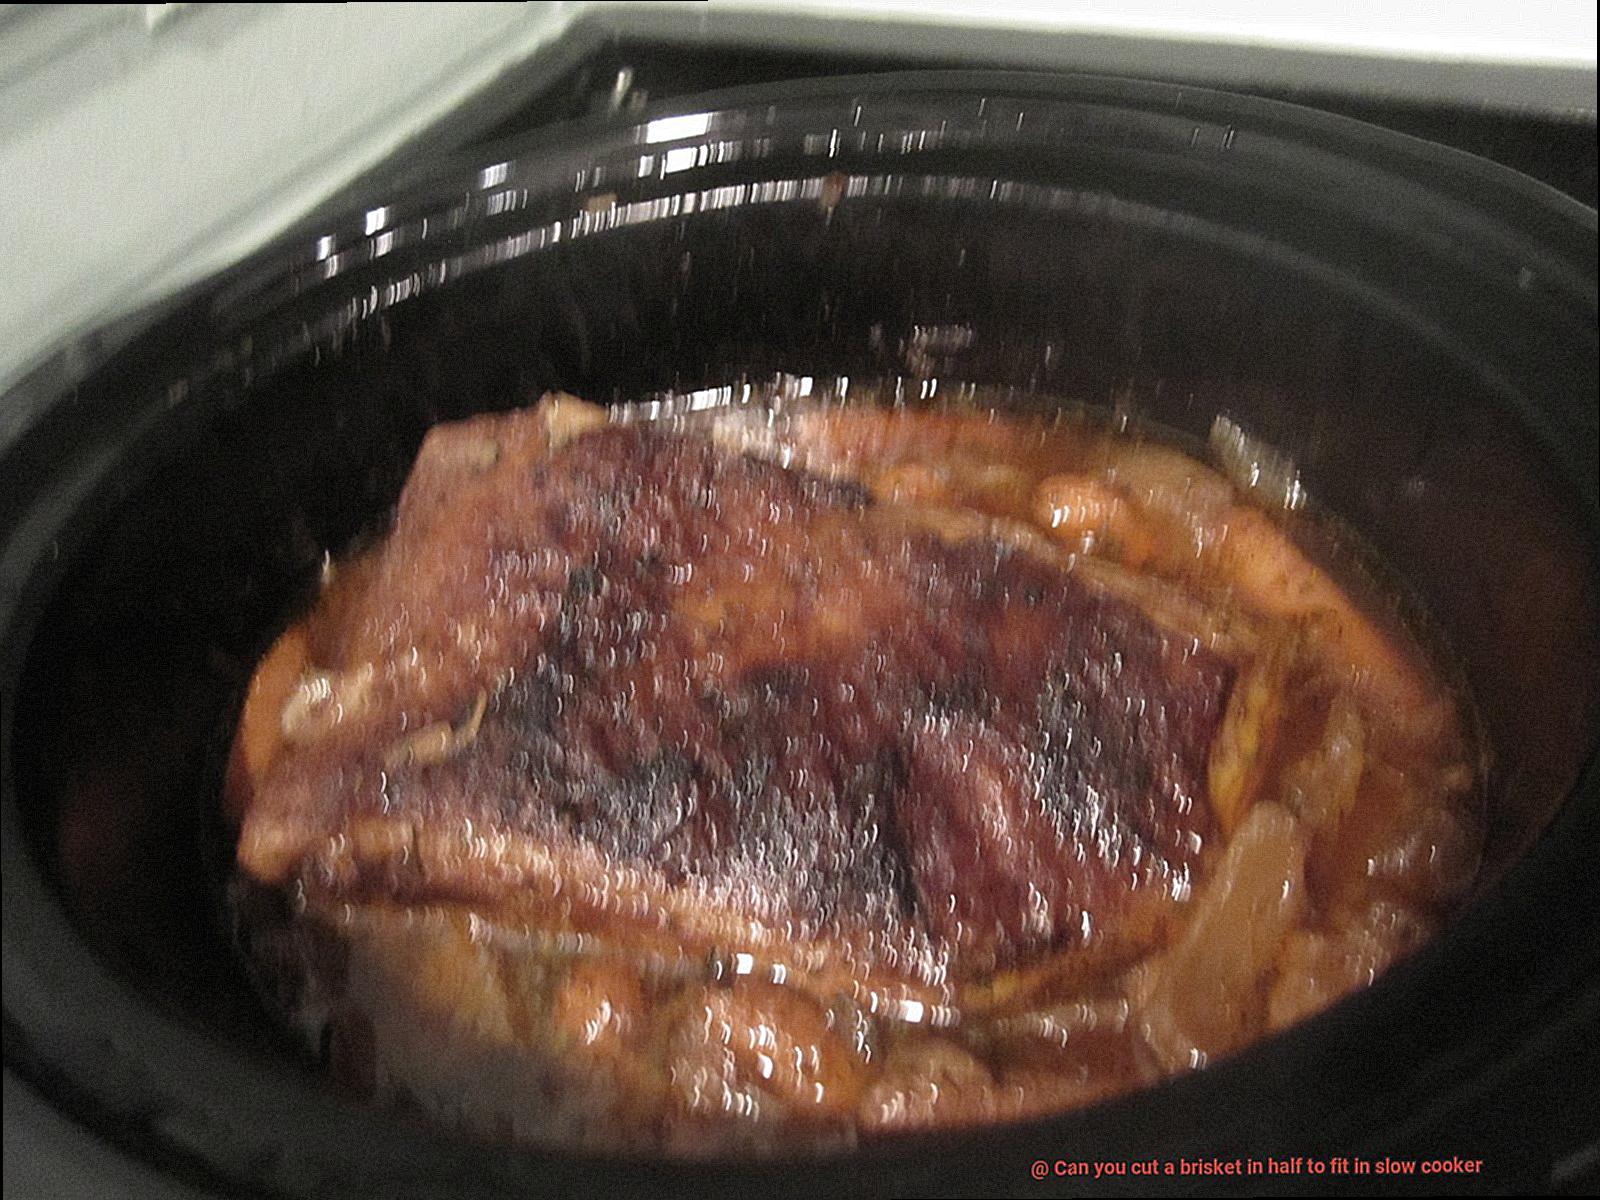 Can you cut a brisket in half to fit in slow cooker-2